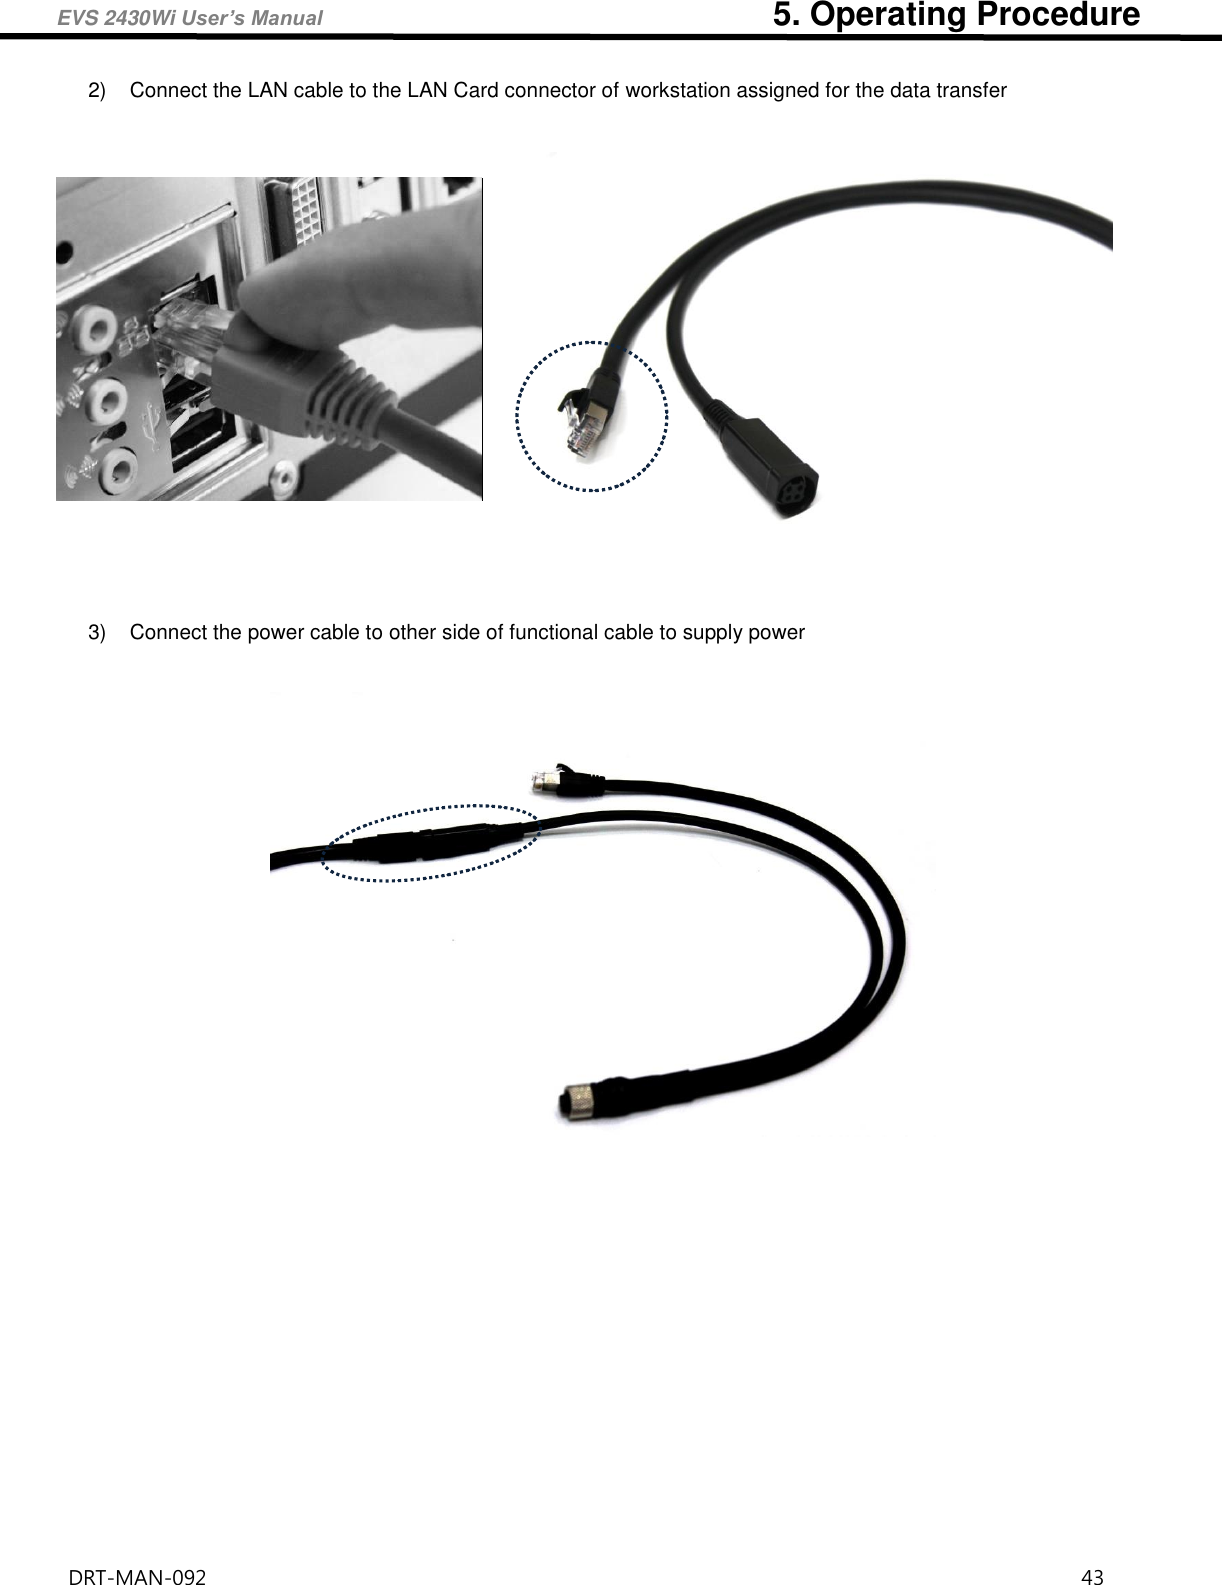 EVS 2430Wi User’s Manual                                                      5. Operating Procedure DRT-MAN-092                                                                                    43   2)  Connect the LAN cable to the LAN Card connector of workstation assigned for the data transfer           3)  Connect the power cable to other side of functional cable to supply power       